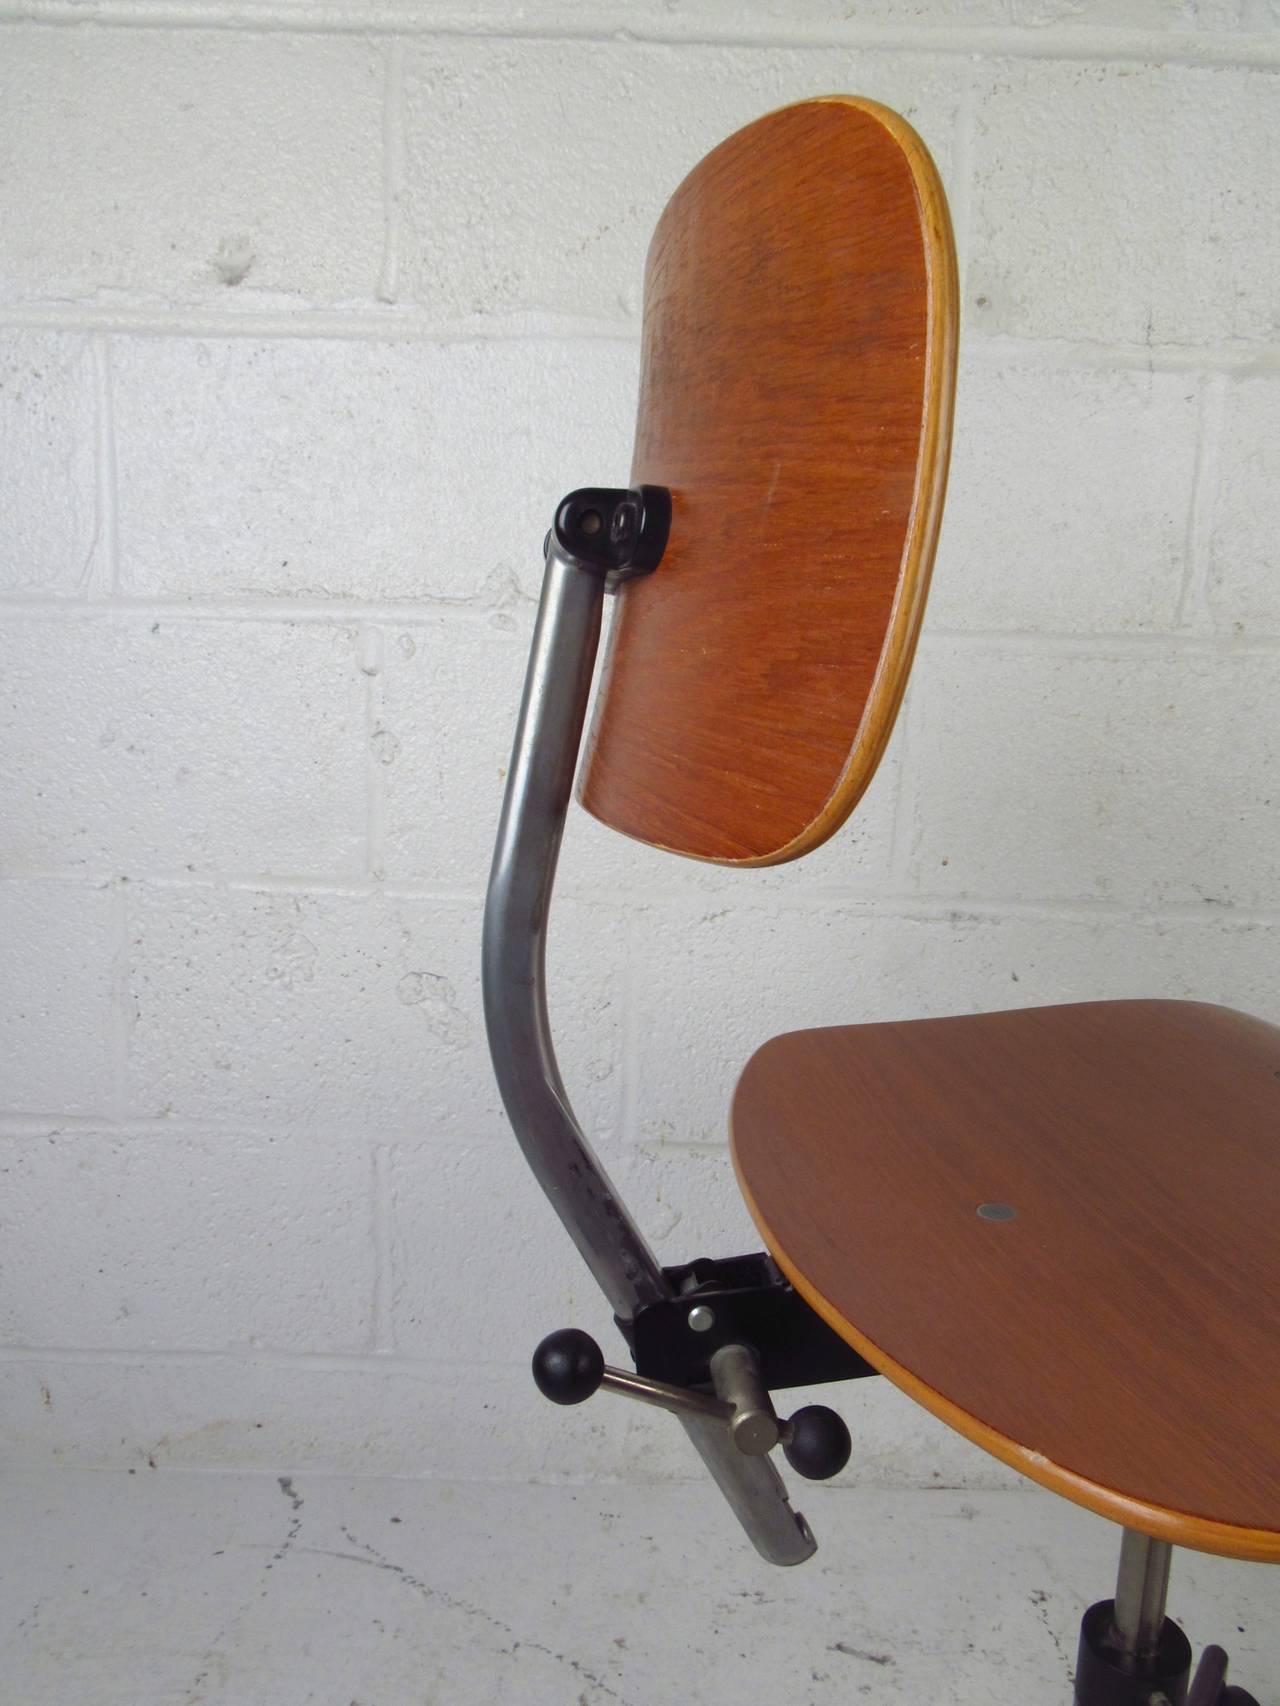 Comfortable desk chair by Kevi, made with bentwood seat and back, metal frame. 360 degree casters, adjustable seat and back height.

(Please confirm item location - NY or NJ - with dealer)